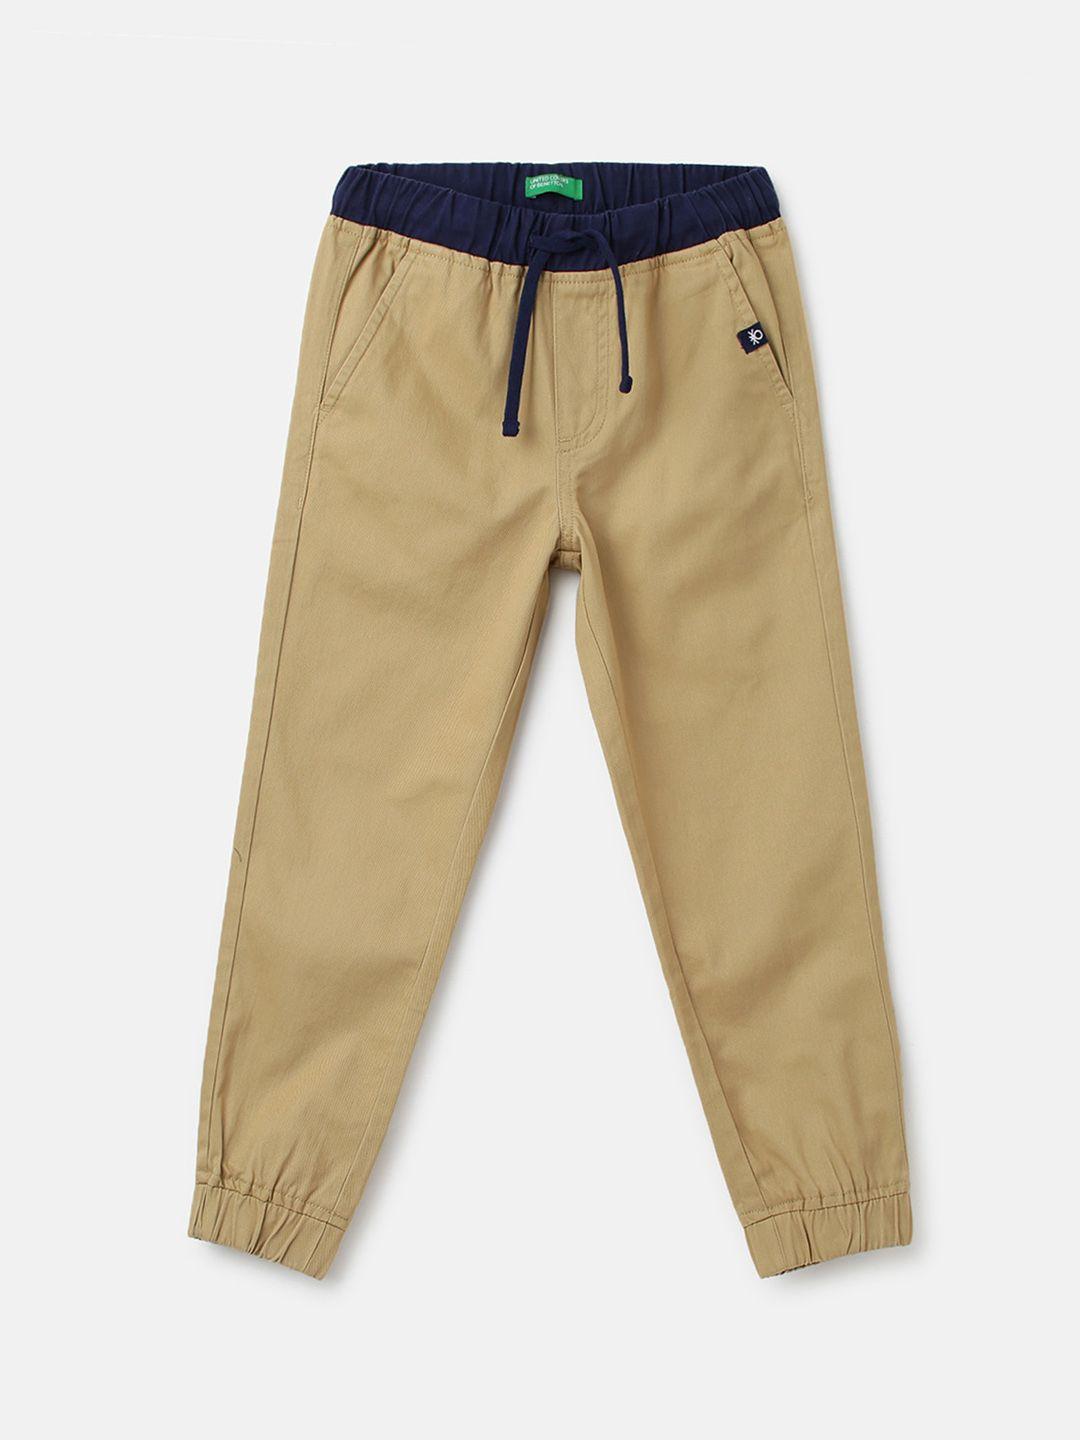 united-colors-of-benetton-boys-cotton-joggers